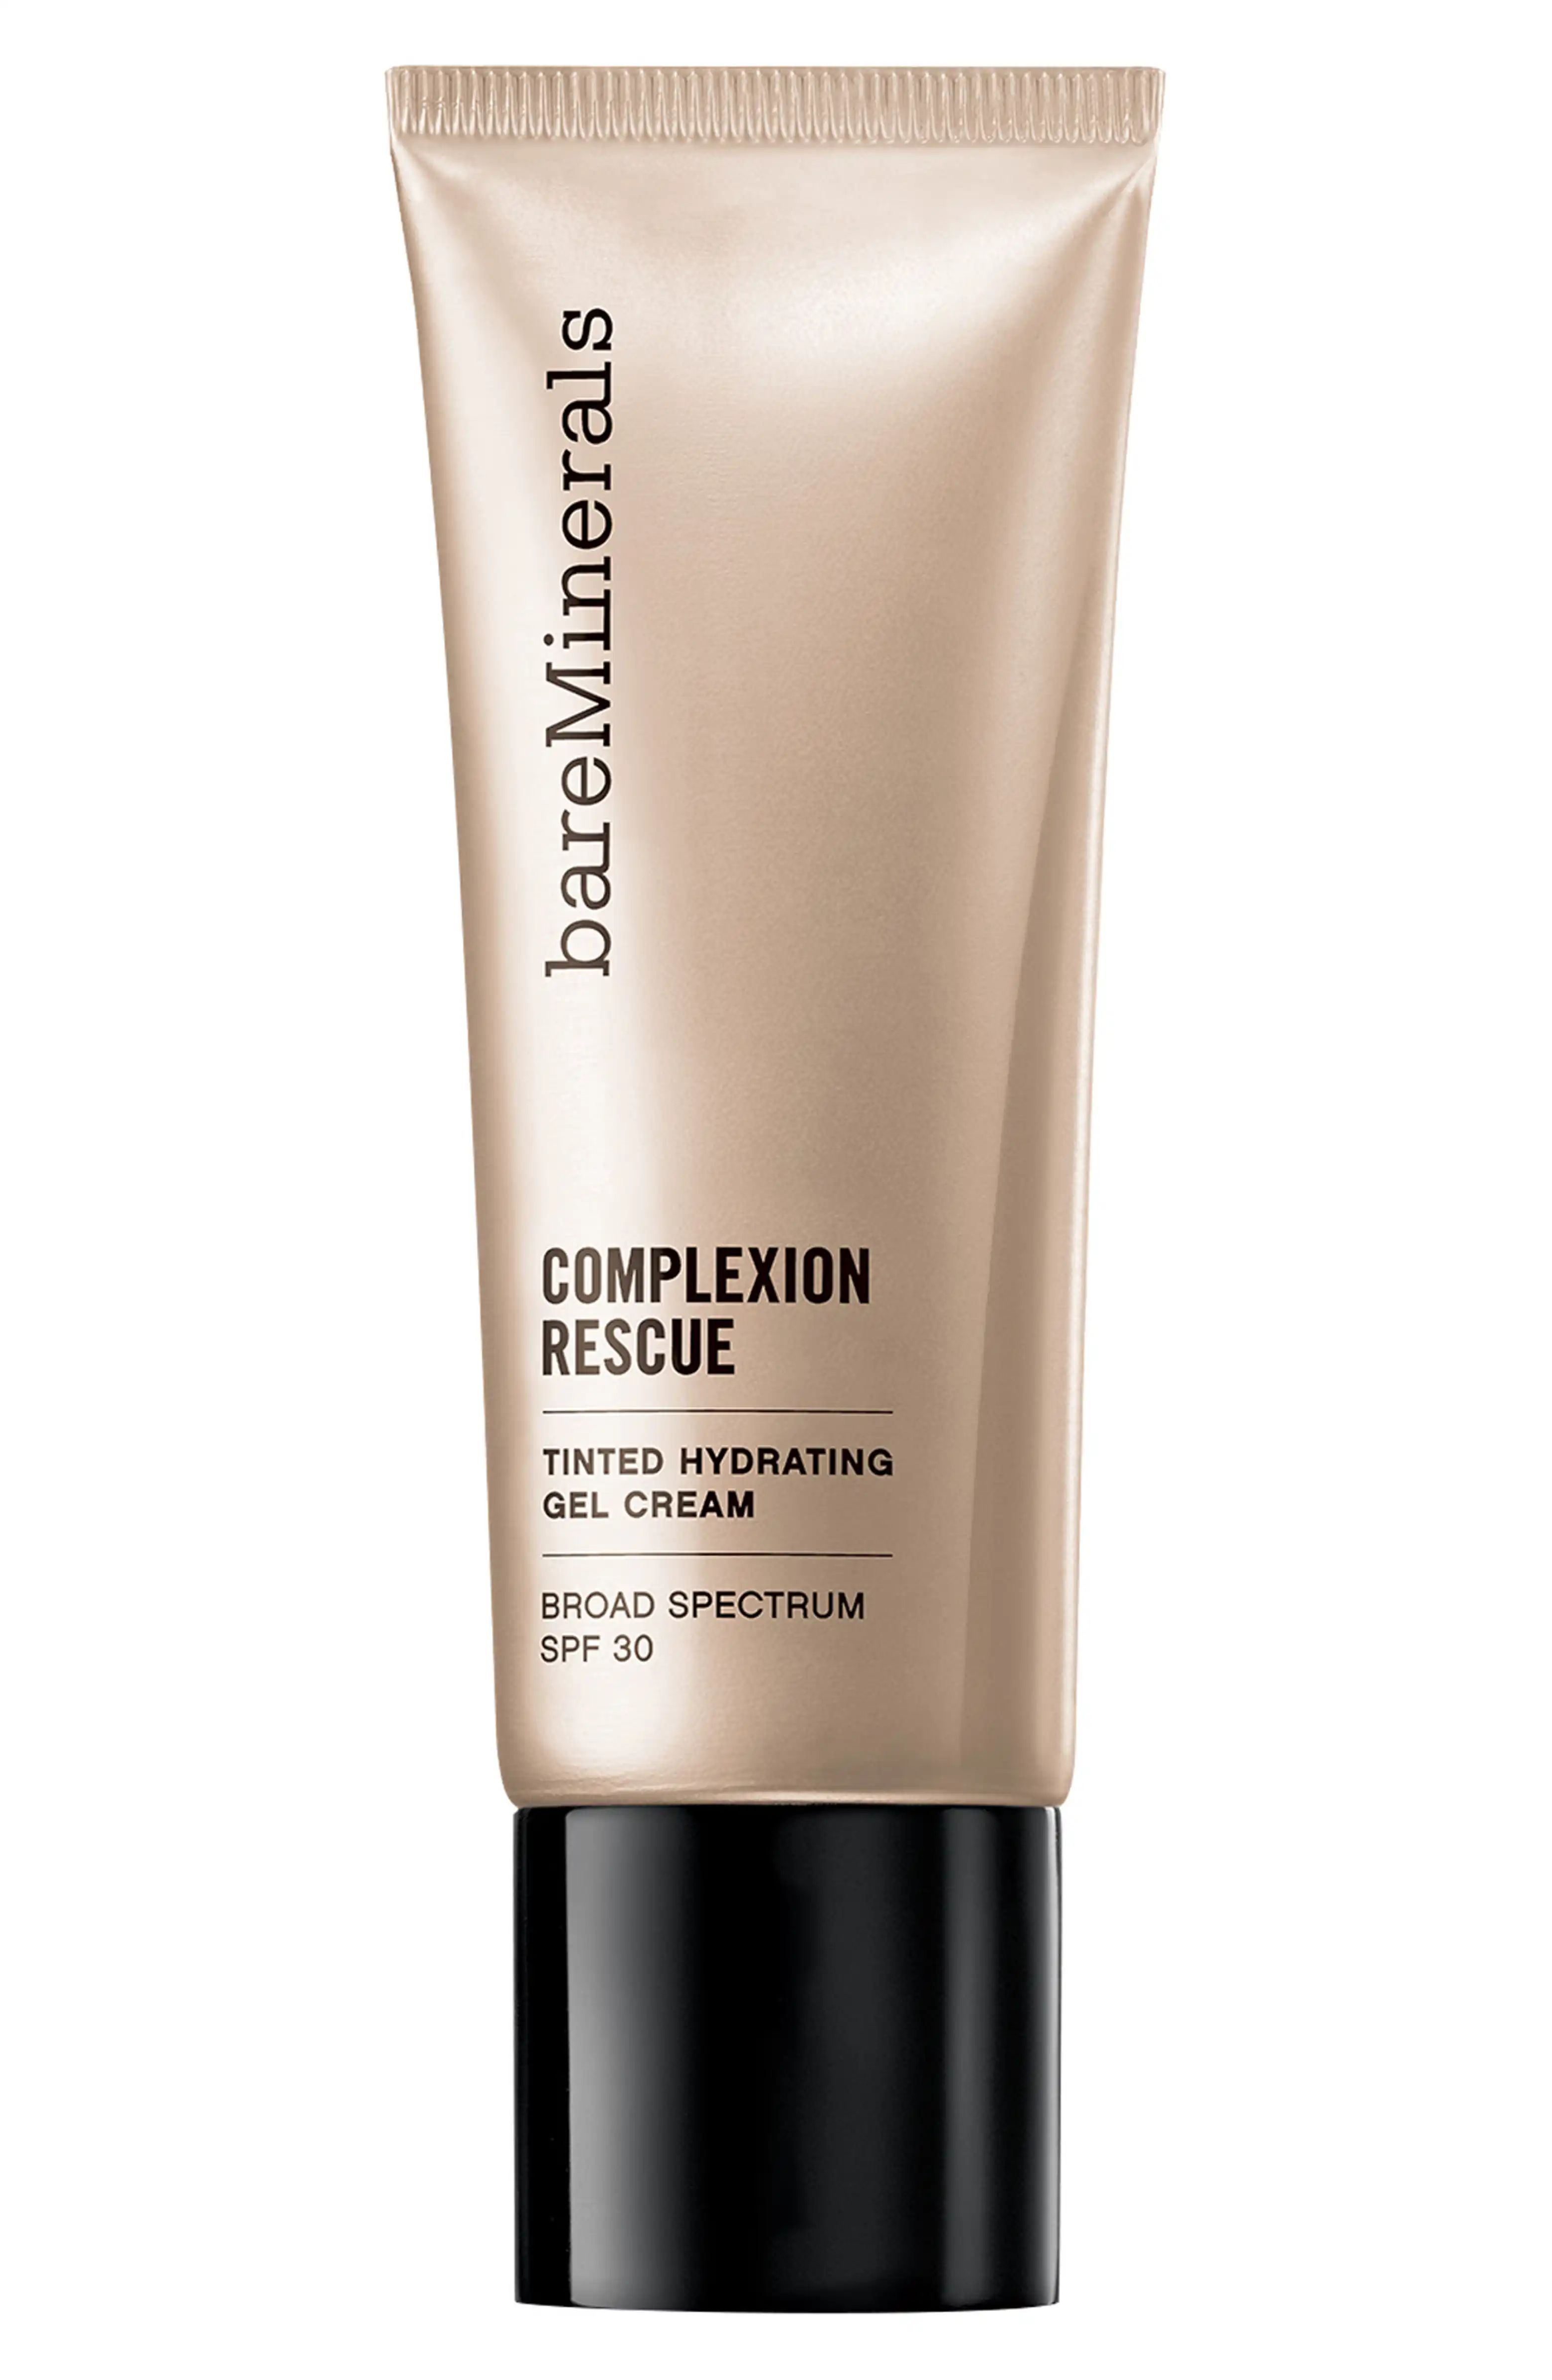 COMPLEXION RESCUE™ Tinted Moisturizer Hydrating Gel Cream SPF 30 | Nordstrom